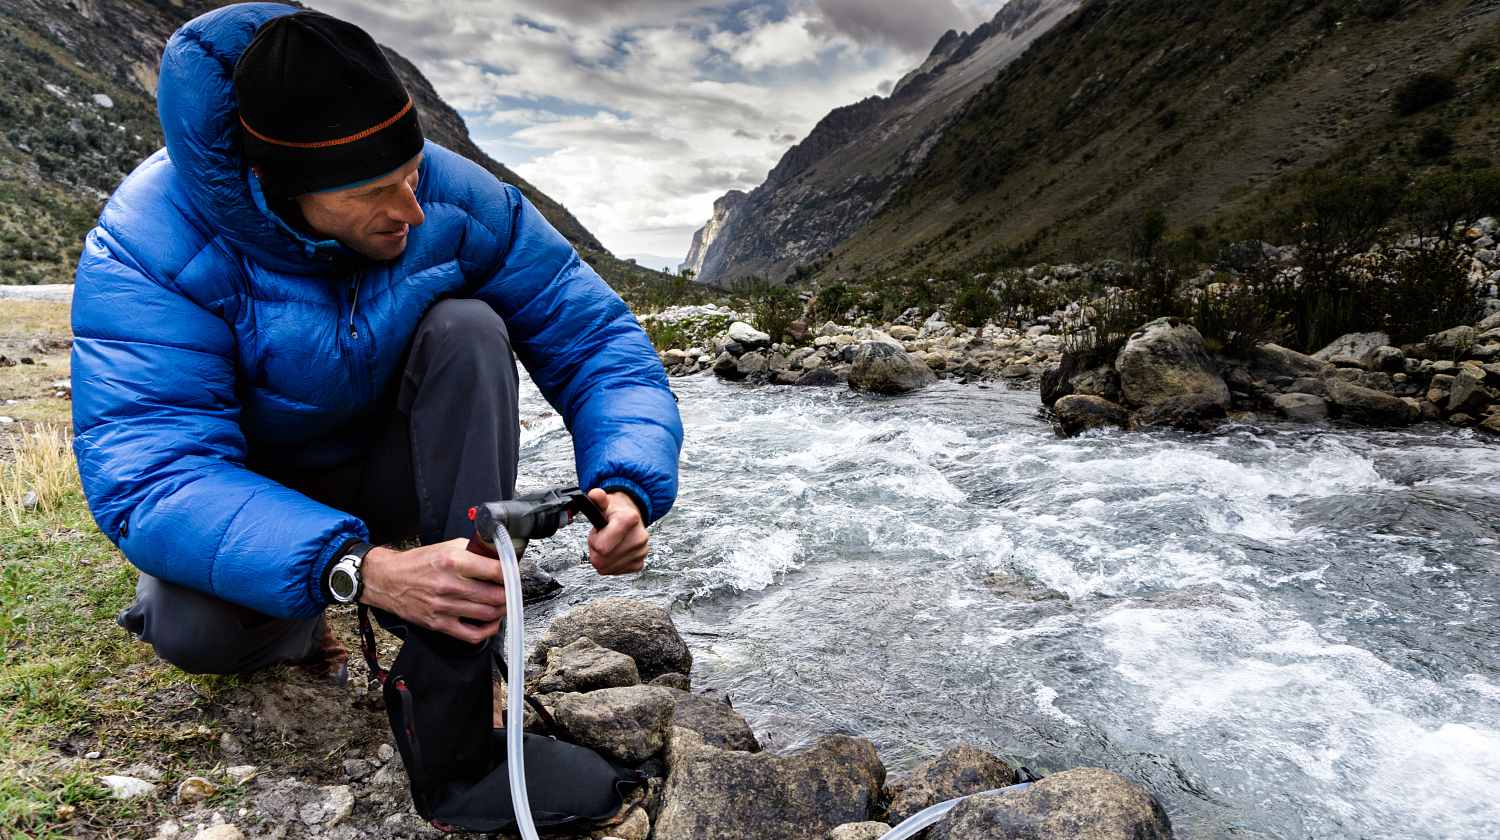 A man in blue down jacket filtering water for drinking from a river | How To Make A DIY Pocket Water Filter [Video] | Featured